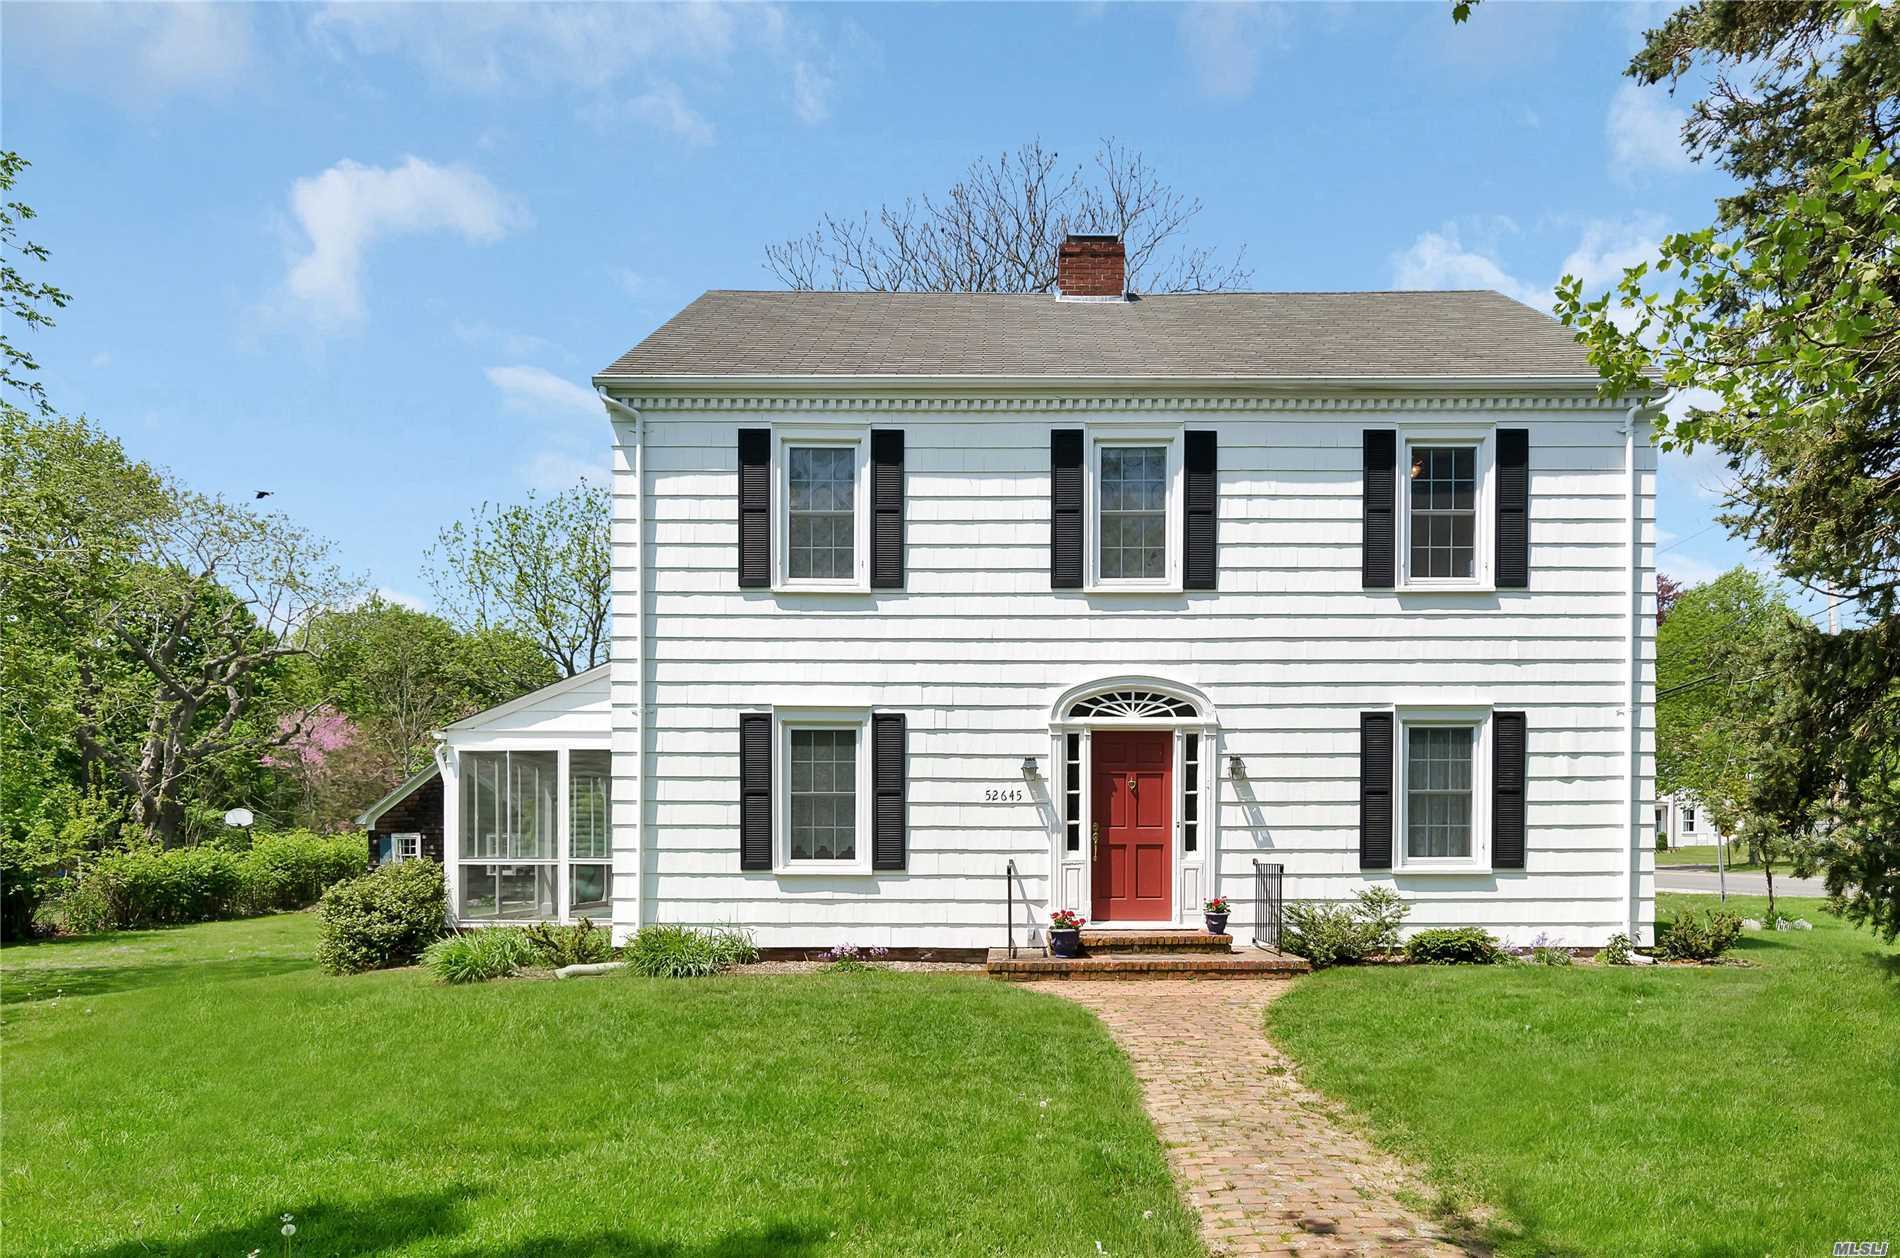 This Classic Center Hall Colonial Offers The Opportunity For Gracious Living With A Center Hall Winding Staircase, Lr W/Fpl, Fdr, Eik, Office/Br, 4 Bedrooms, Full Walk-Up Attic, Screened Porch.  Street Gas, Public Water. In Town Location - Walk To All. Zoned Residential Office. All On Approximately 1/2 Acre.